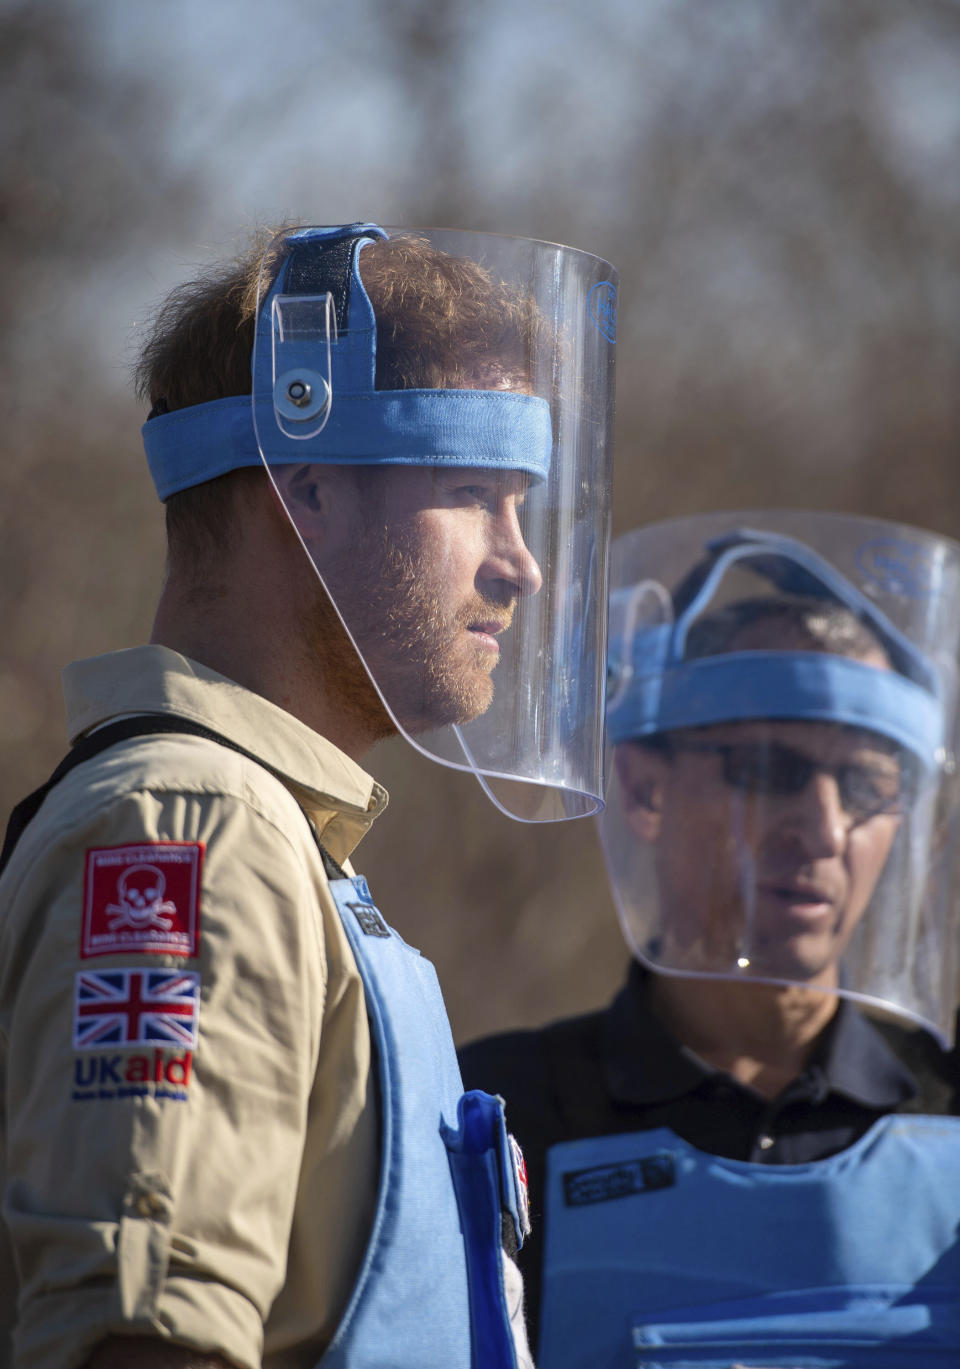 Britain's Prince Harry walks through a minefield in Dirico, Angola Friday Sept. 27, 2019, during a visit to see the work of landmine clearance charity the Halo Trust, on day five of the royal tour of Africa. Prince Harry is following in the footsteps of his late mother, Princess Diana, whose walk through an active mine field in Angola years ago helped to lead to a global ban on the deadly weapons. (Dominic Lipinski/Pool via AP)